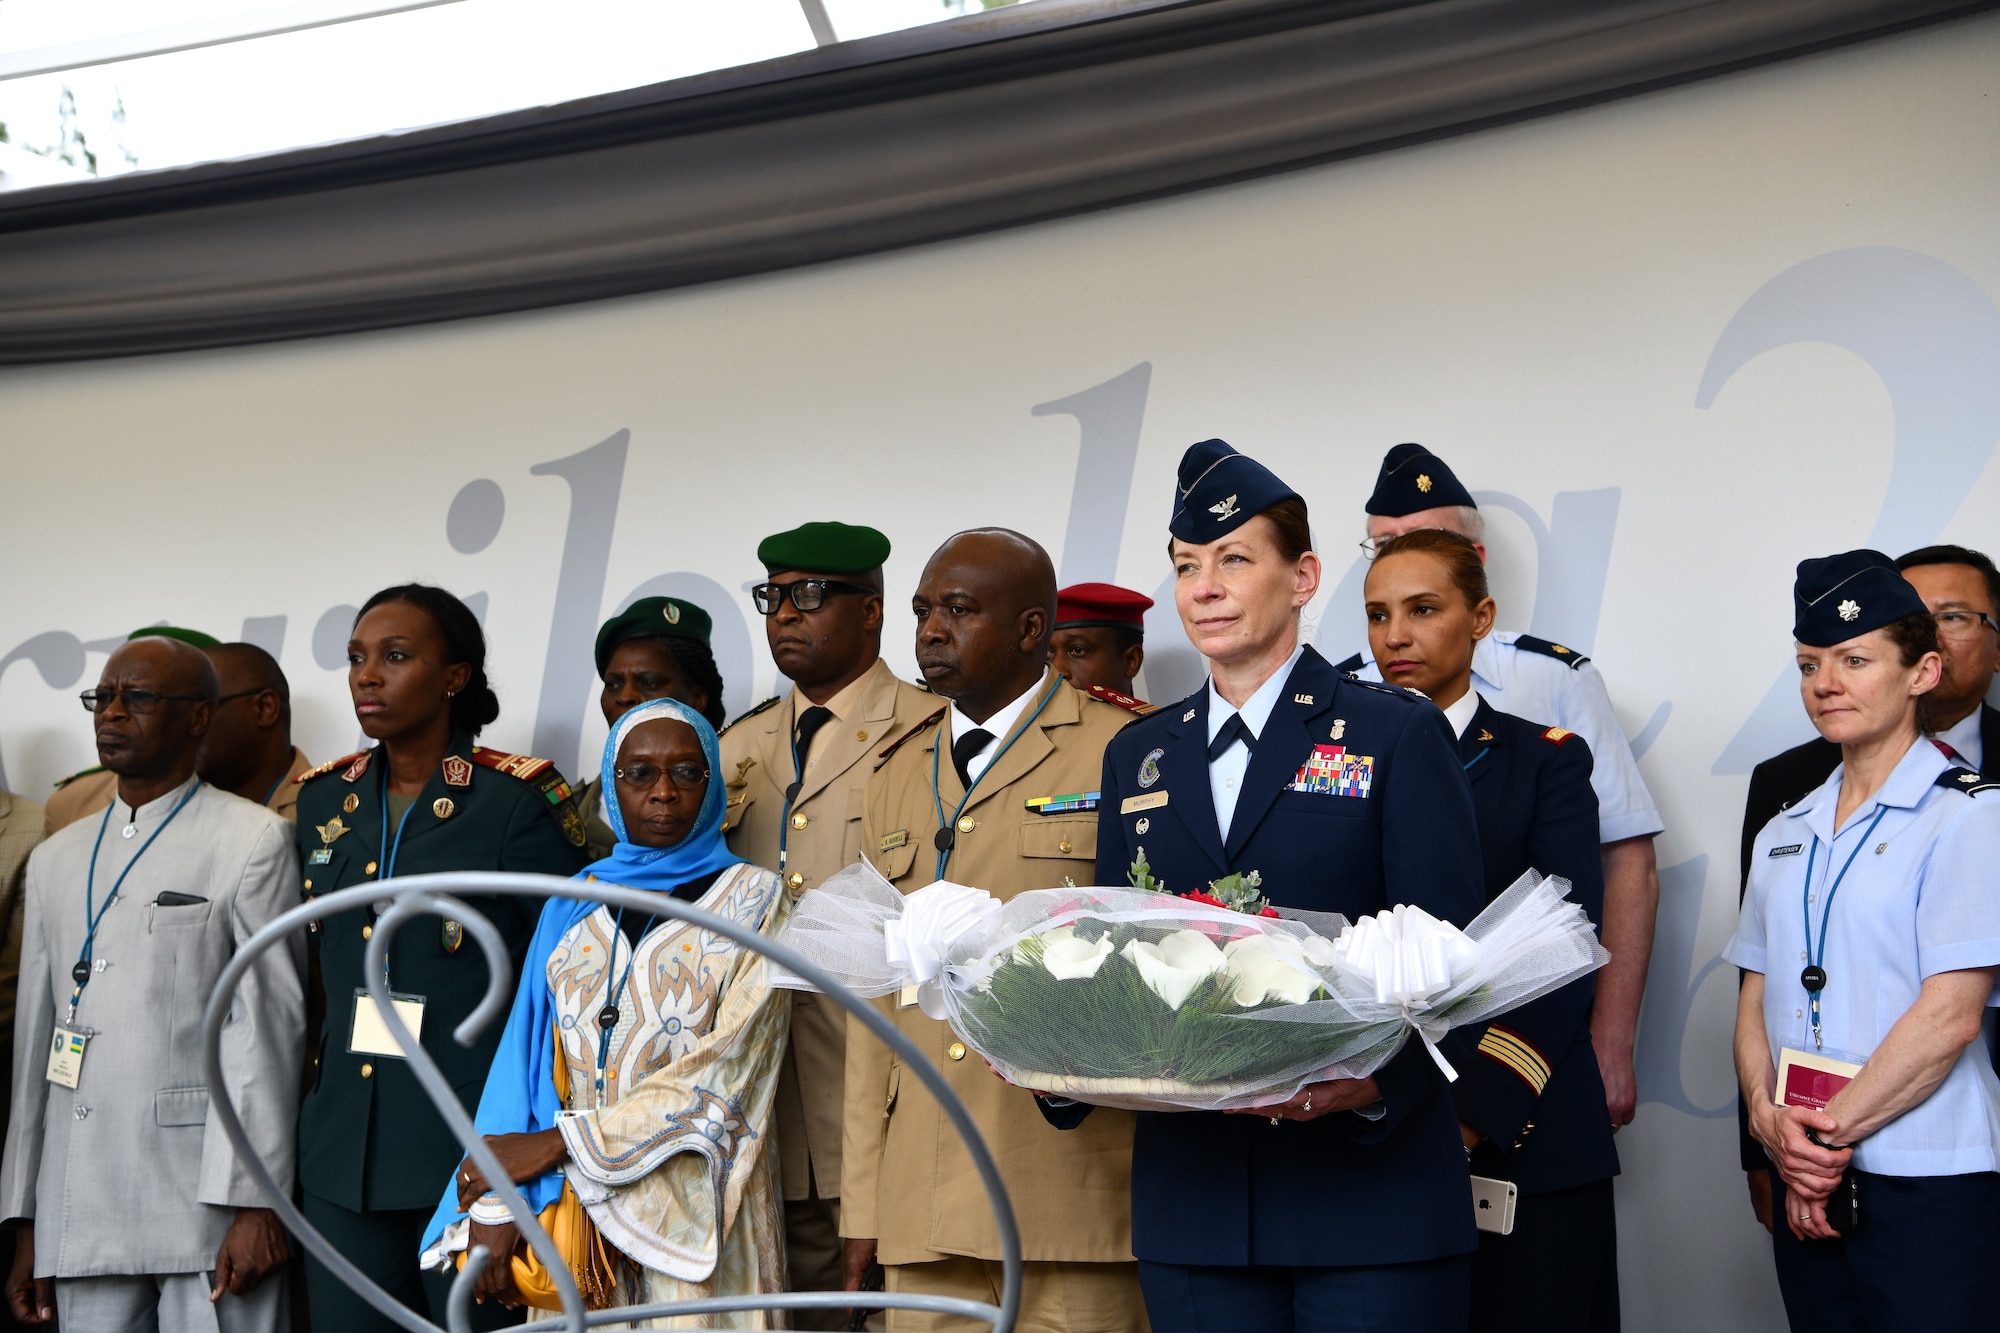 U.S. Air Force Col. Krystal Murphy, Deputy Command Surgeon for U.S. Africa Command, prepares to place a bouquet of flowers on a memorial during a visit to the Kigali Genocide Memorial in Kigali, Rwanda on May 22, 2019. Participants who attended the African Partner Outbreak Response Alliance (APORA) conference got an opportunity to visit the memorial for an afternoon. During APORA, military and civilian leaders worked together to align best practices and improve response capabilities for potential outbreaks of contagious diseases. The training bolstered relationships with current partners and mobilize new partners to strengthen pandemic prevention programs. (U.S. Air Force photo by Master Sgt. Andy M. Kin)